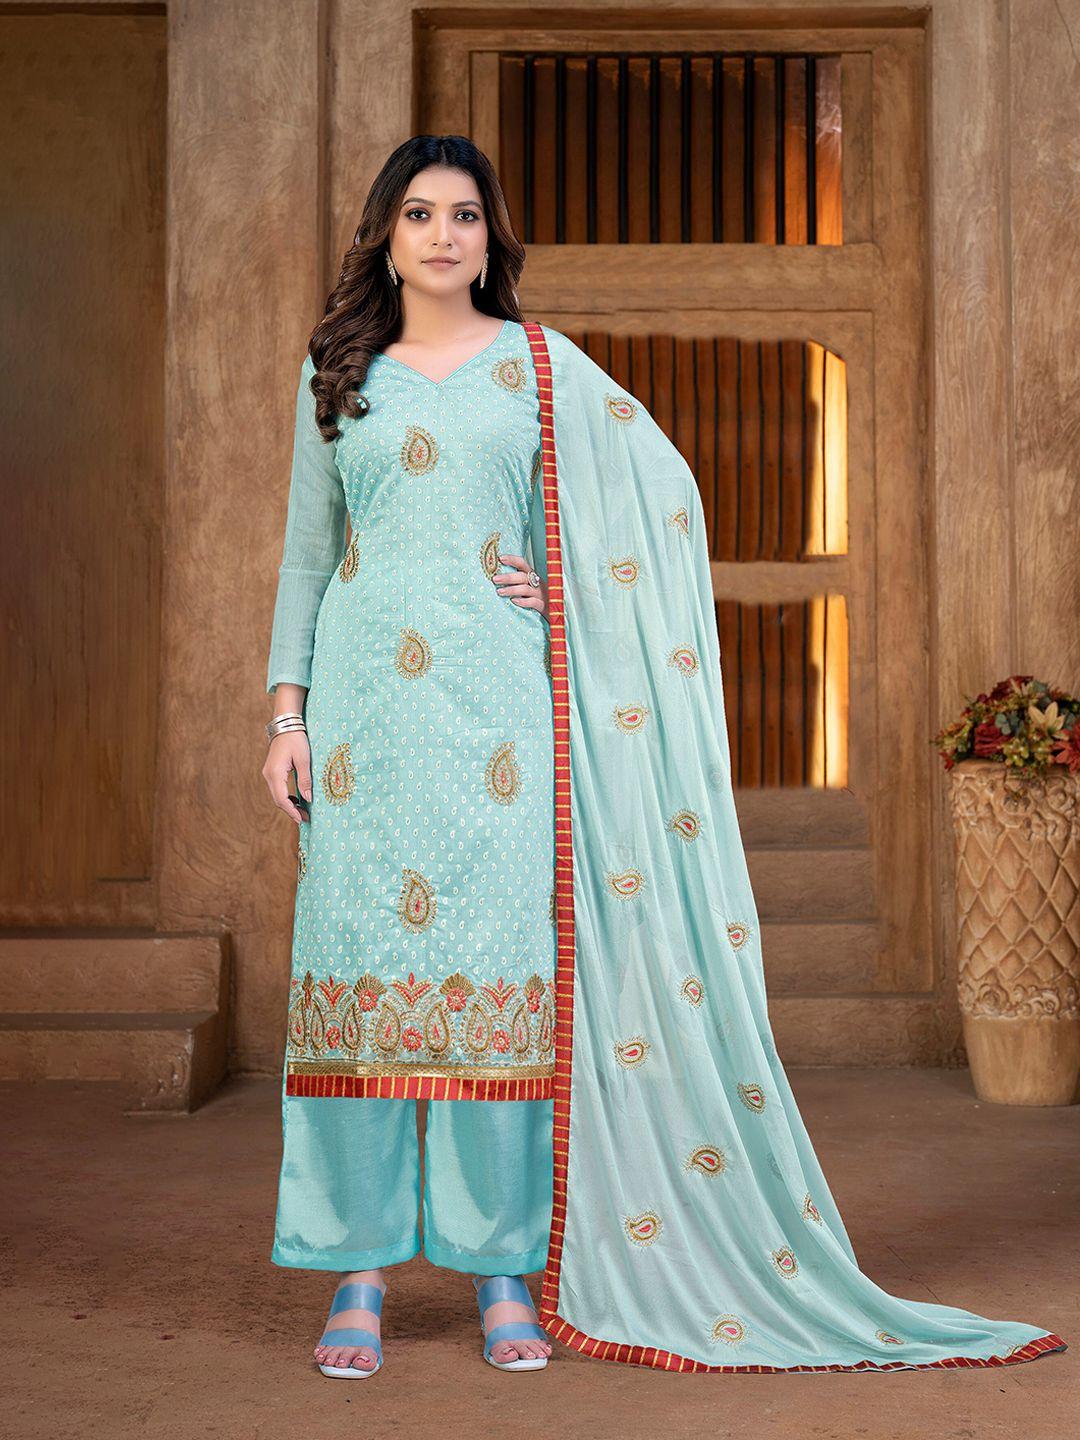 shadow & saining paisley embroidered pure cotton unstitched dress material with dupatta